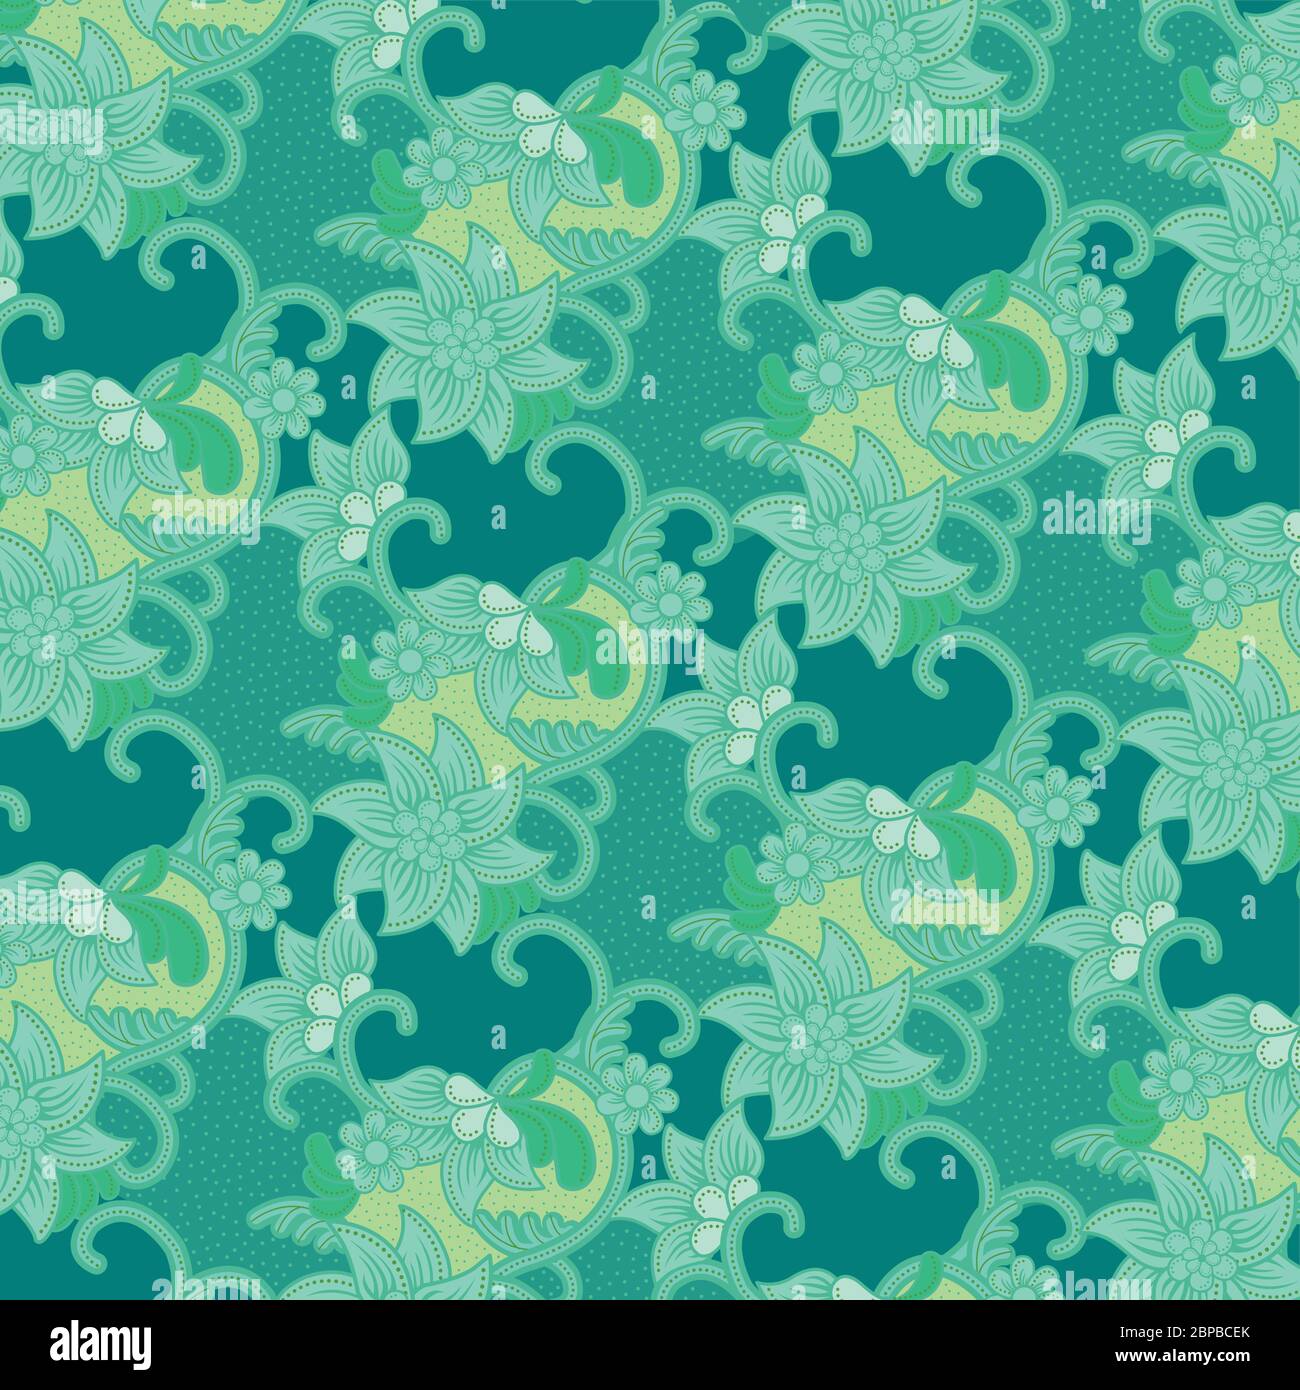 Traditional floral pattern batik drawing with dots and curly lines in turquoise and green tone. Batik is an Indonesian technique of wax-resist dyeing . Stock Vector